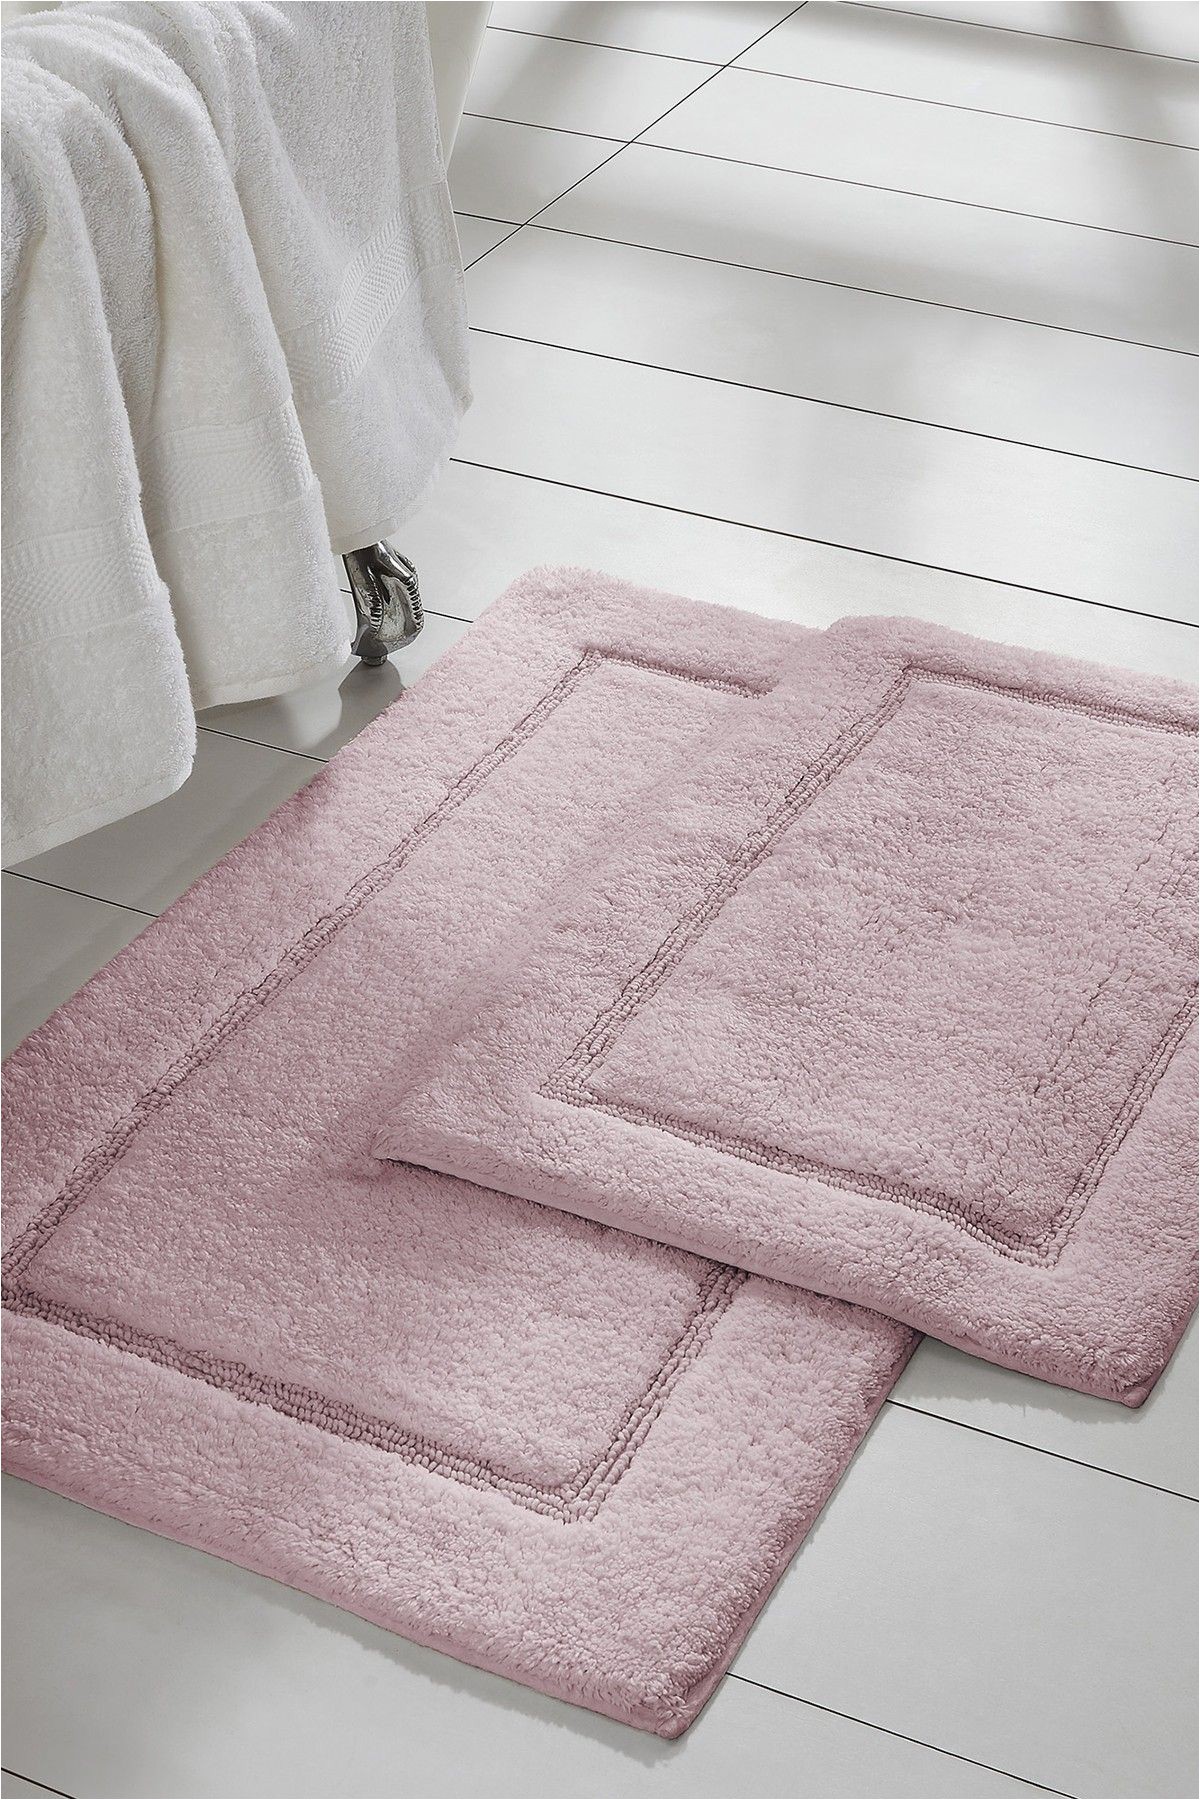 Dusty Rose Bathroom Rugs Pin On Stylish Outfits